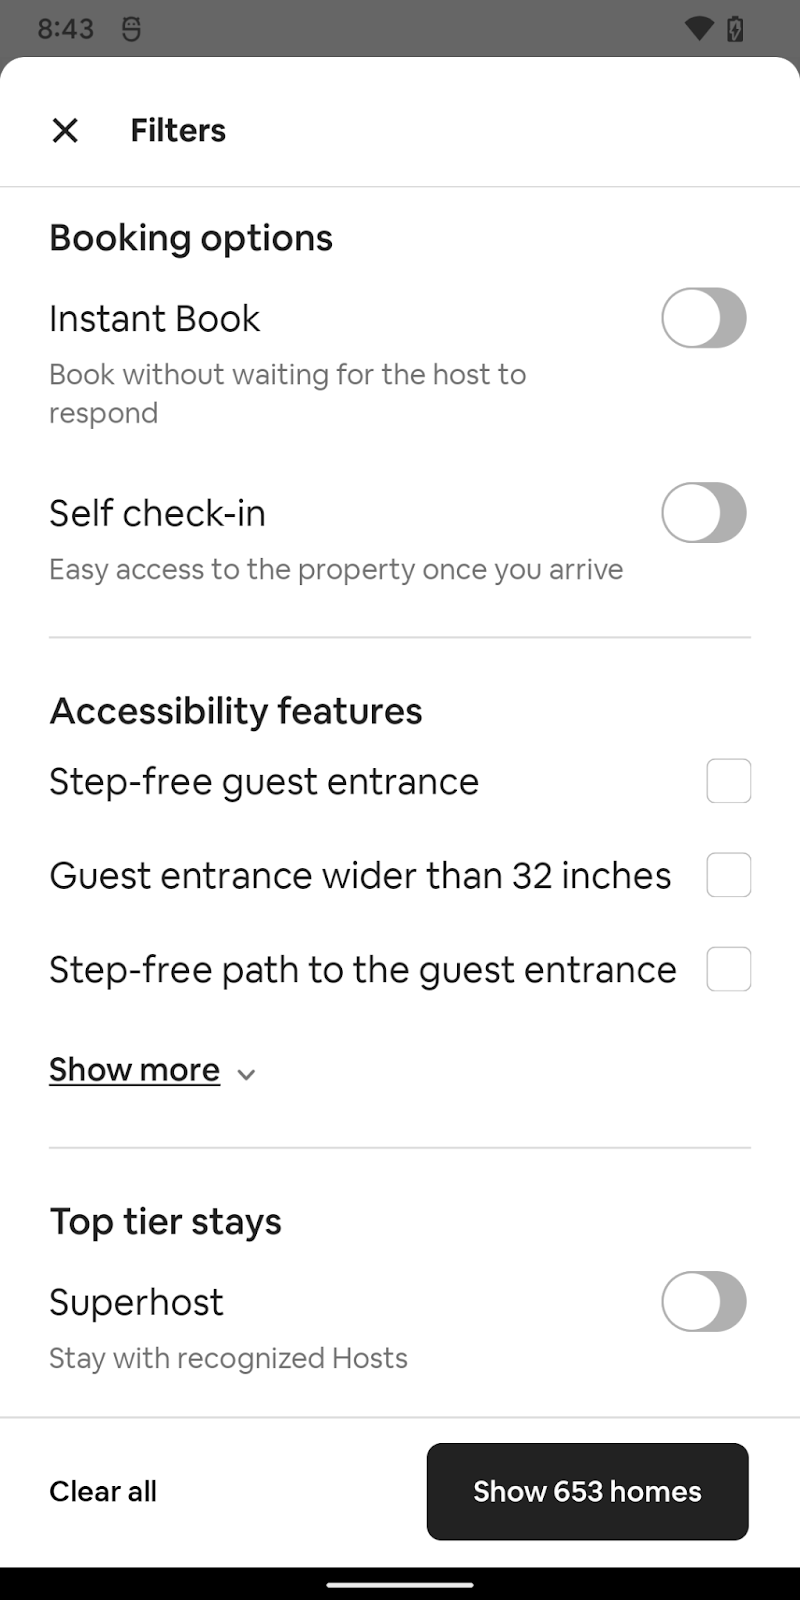 The accessibility filters screen for a stay includes a large icon, a heading, subheadings, multiple checkbox options for various features (such as “no stairs or steps to enter”), and a footer..